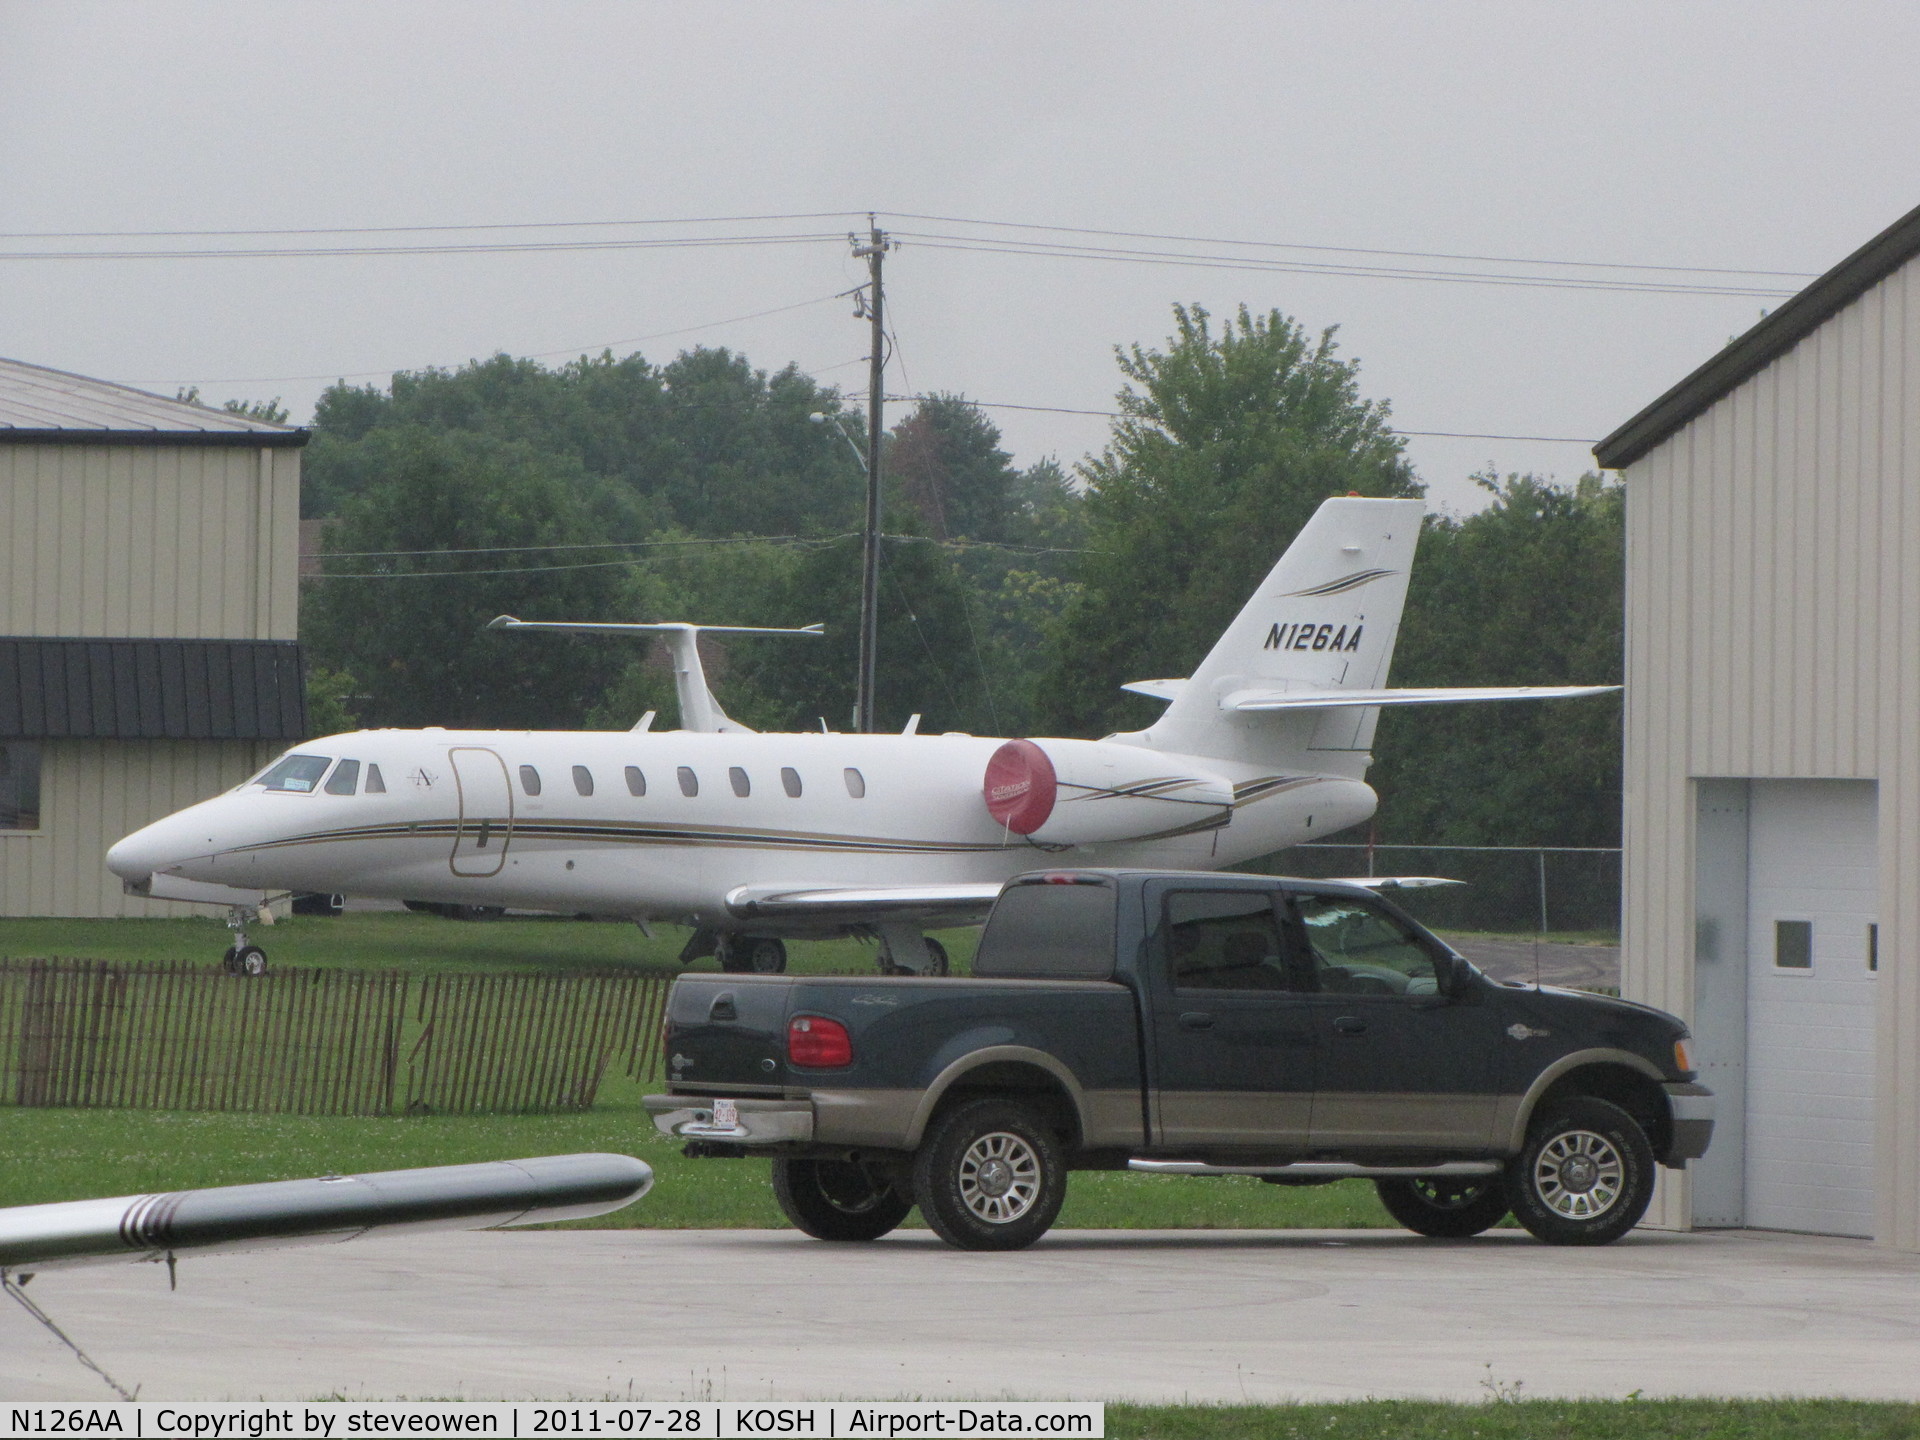 N126AA, 2005 Cessna 680 Citation Sovereign C/N 680-0037, parked at the 